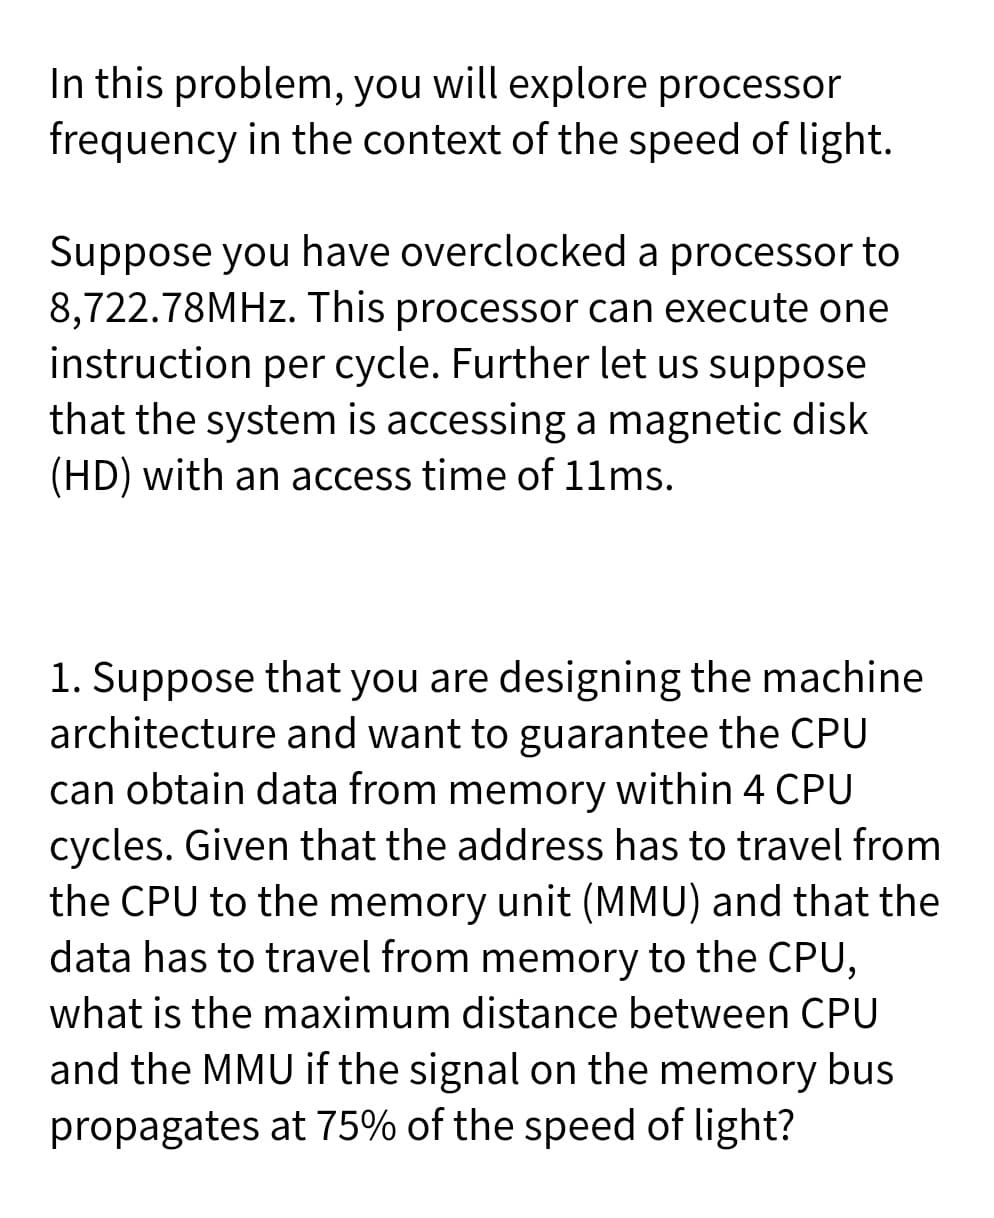 In this problem, you will explore processor
frequency in the context of the speed of light.
Suppose you have overclocked a processor to
8,722.78MHZ. This processor can execute one
instruction per cycle. Further let us suppose
that the system is accessing a magnetic disk
(HD) with an access time of 11ms.
1. Suppose that you are designing the machine
architecture and want to guarantee the CPU
can obtain data from memory within 4 CPU
cycles. Given that the address has to travel from
the CPU to the memory unit (MMU) and that the
data has to travel from memory to the CPU,
what is the maximum distance between CPU
and the MMU if the signal on the memory bus
propagates at 75% of the speed of light?
